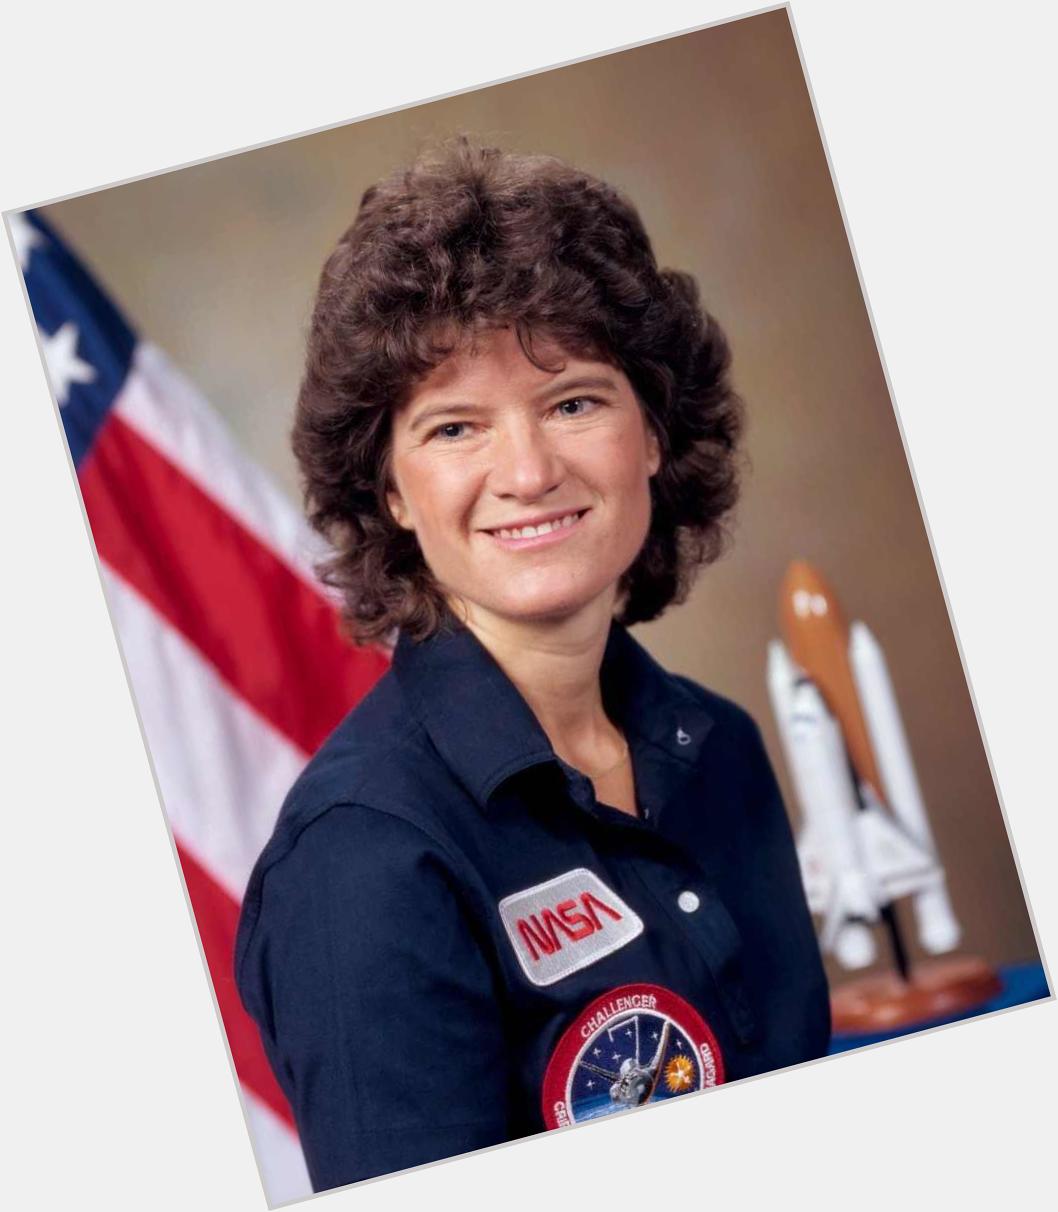 Happy birthday to Sally Ride, the first American woman to fly in space. 